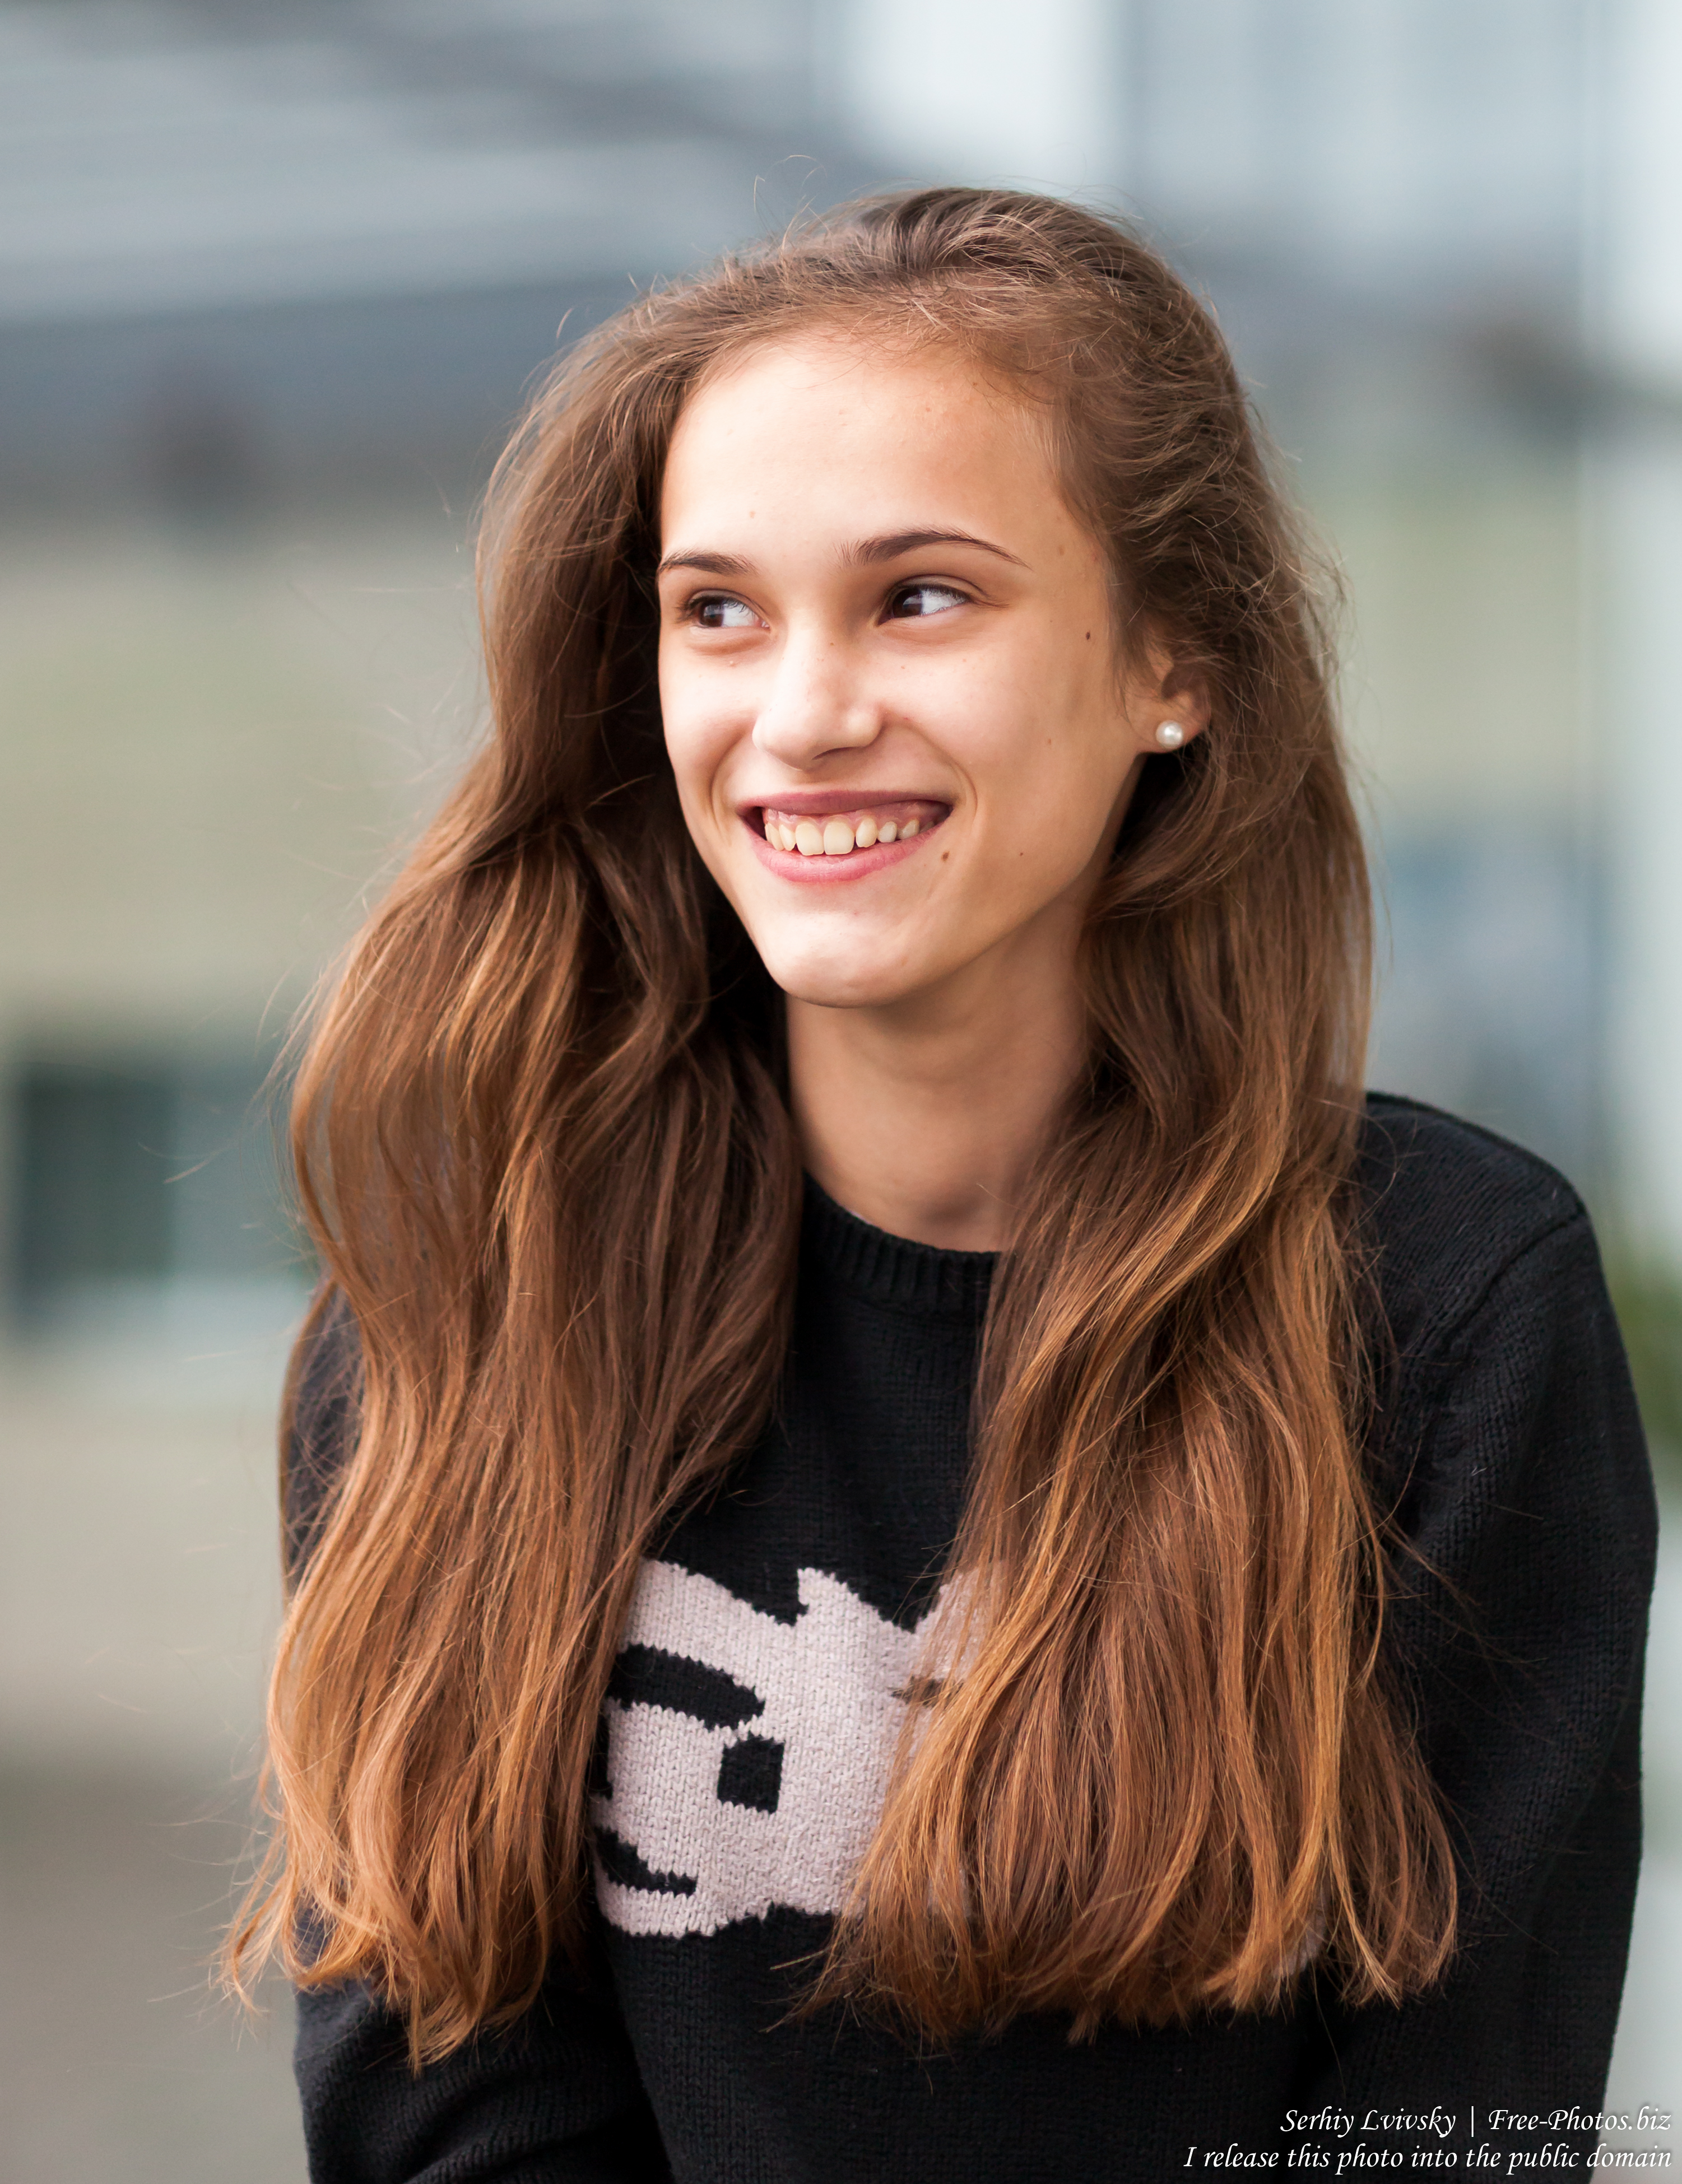 Ania - a 14-year-old girl photographed in October 2017 by Serhiy Lvivsky, picture 3